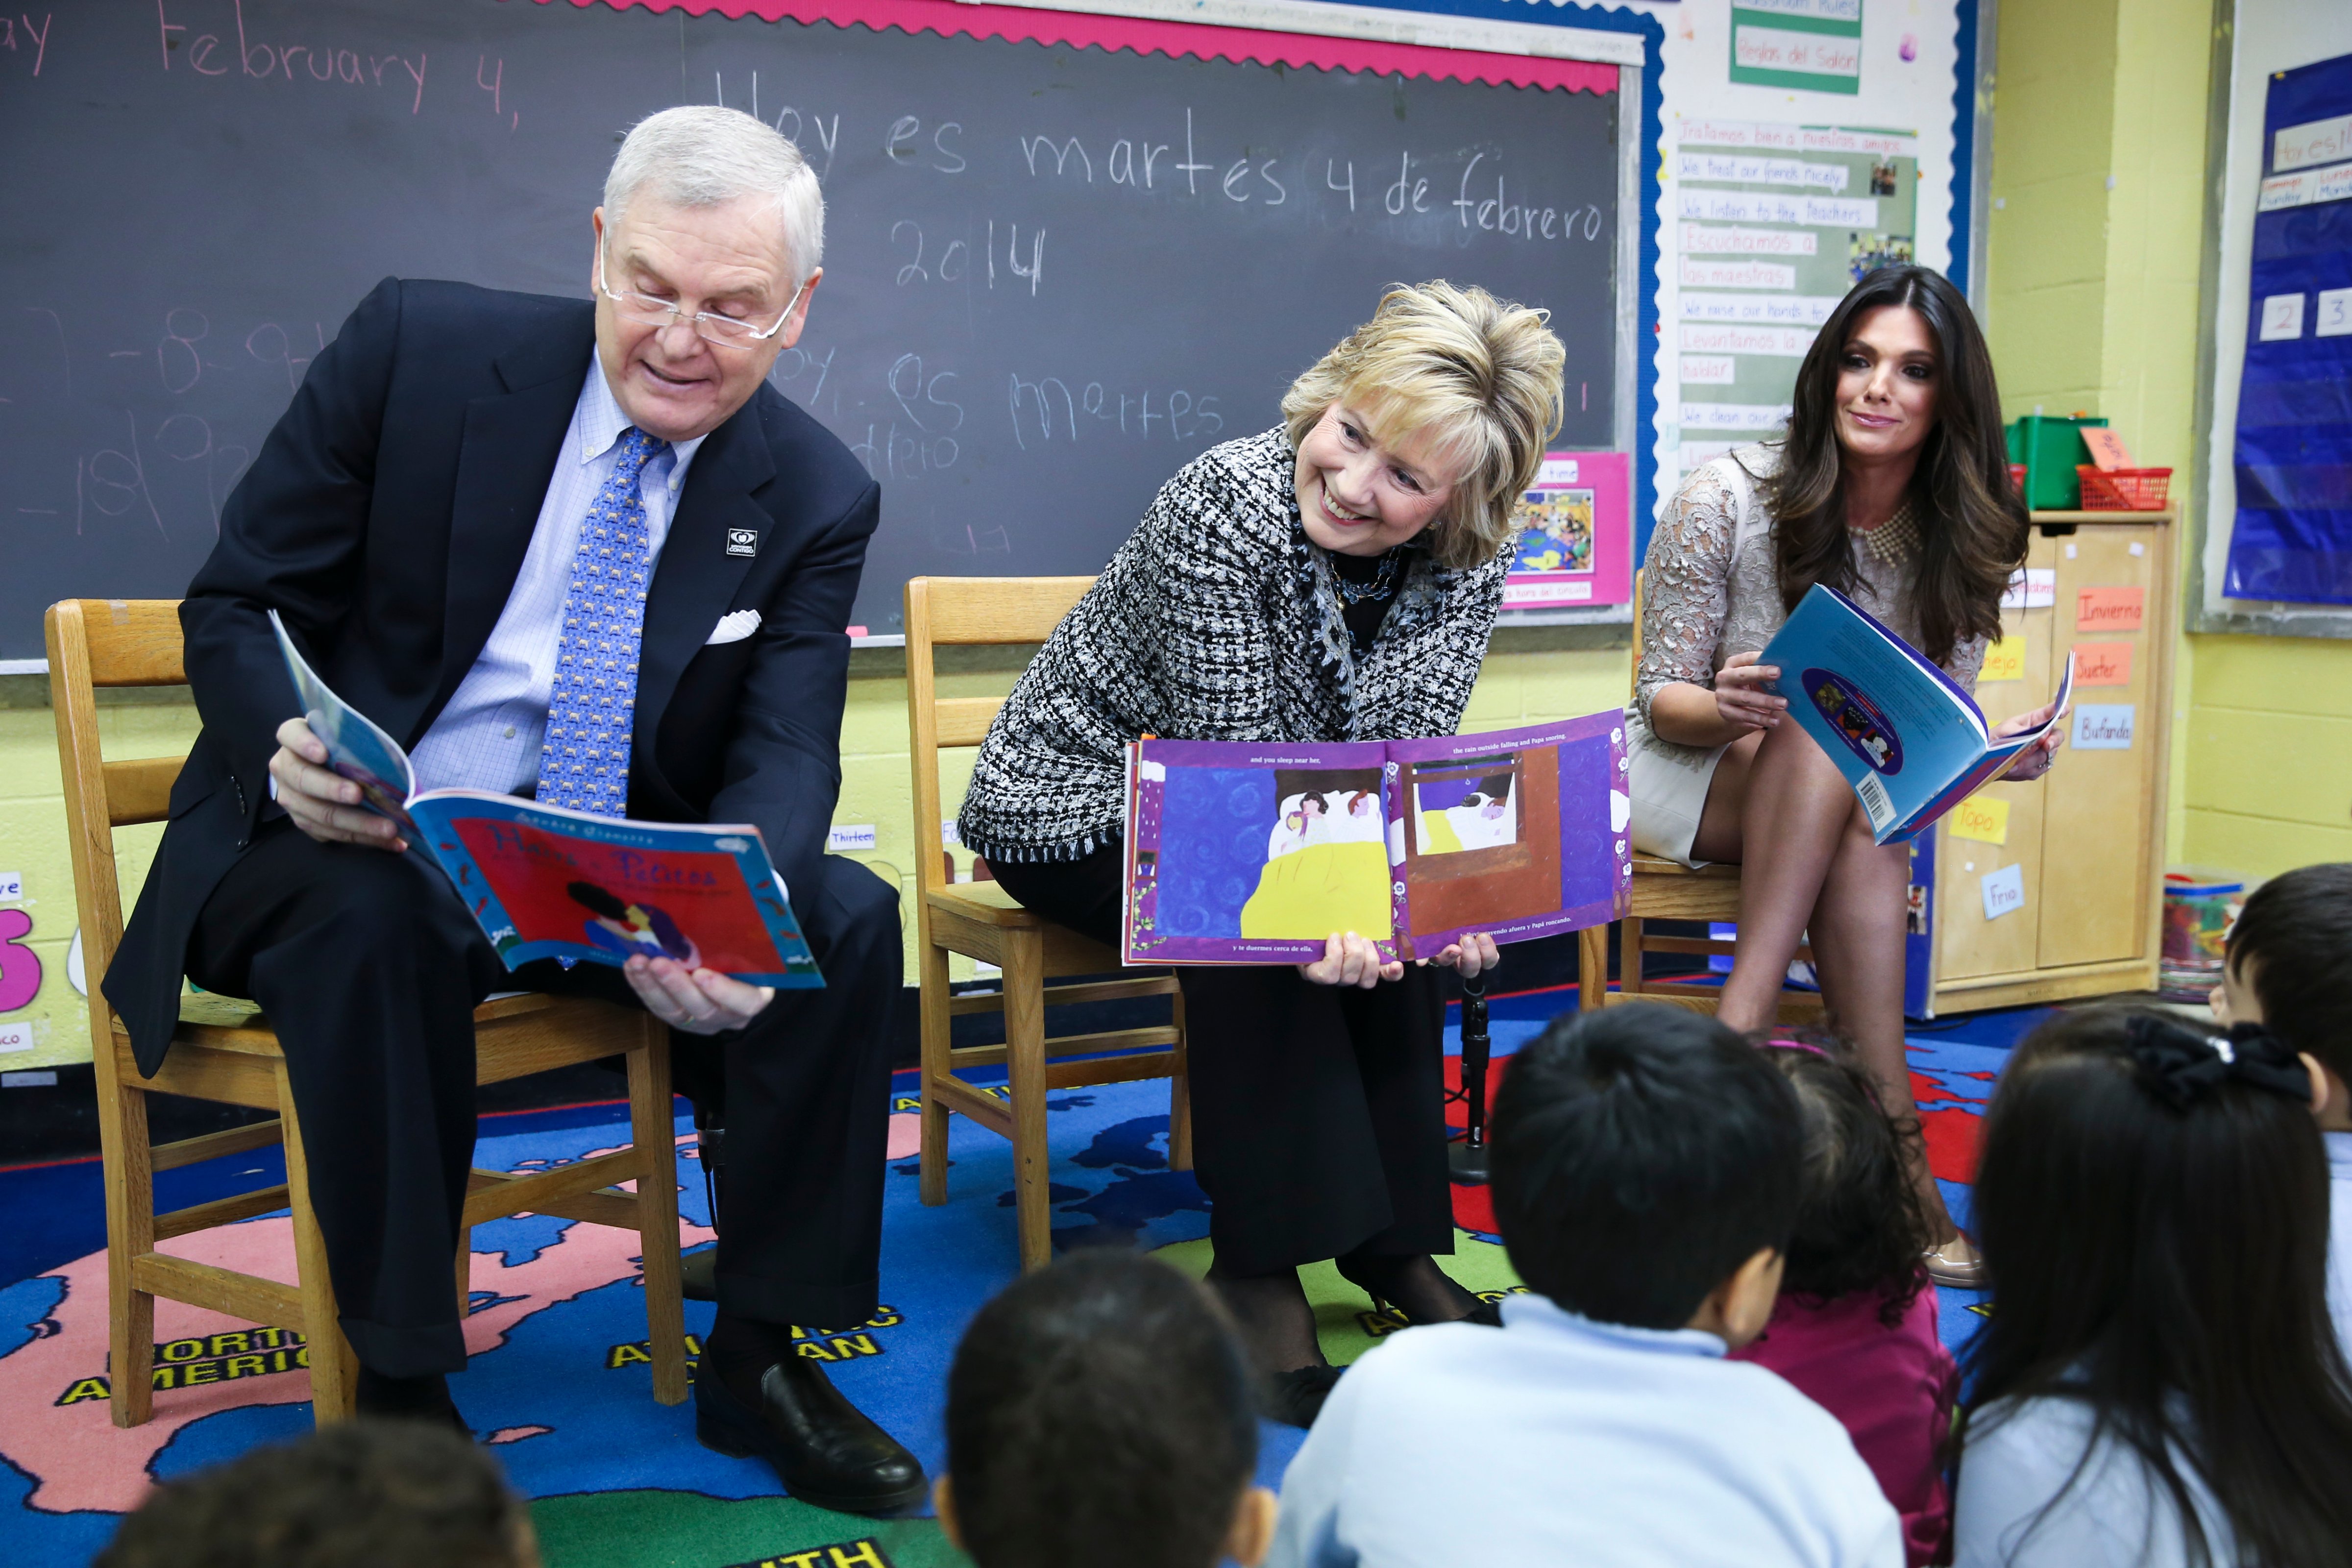 Hillary Rodham Clinton, center, alongside Randy Falco, president and CEO of Univision Communications Inc, left, and Barbara Bermudo, host of Univision's news magazine program "Primer Impacto", right, read to children at the launch of "Pequeños y Valiosos" (Young and Valuable), a parent-focused effort on early childhood development, at the East Harlem Council for Human Services Bilingual Headstart Program, Tuesday, Feb. 4, 2014, in New York. (John Minchillo&mdash;AP Images for Univision)